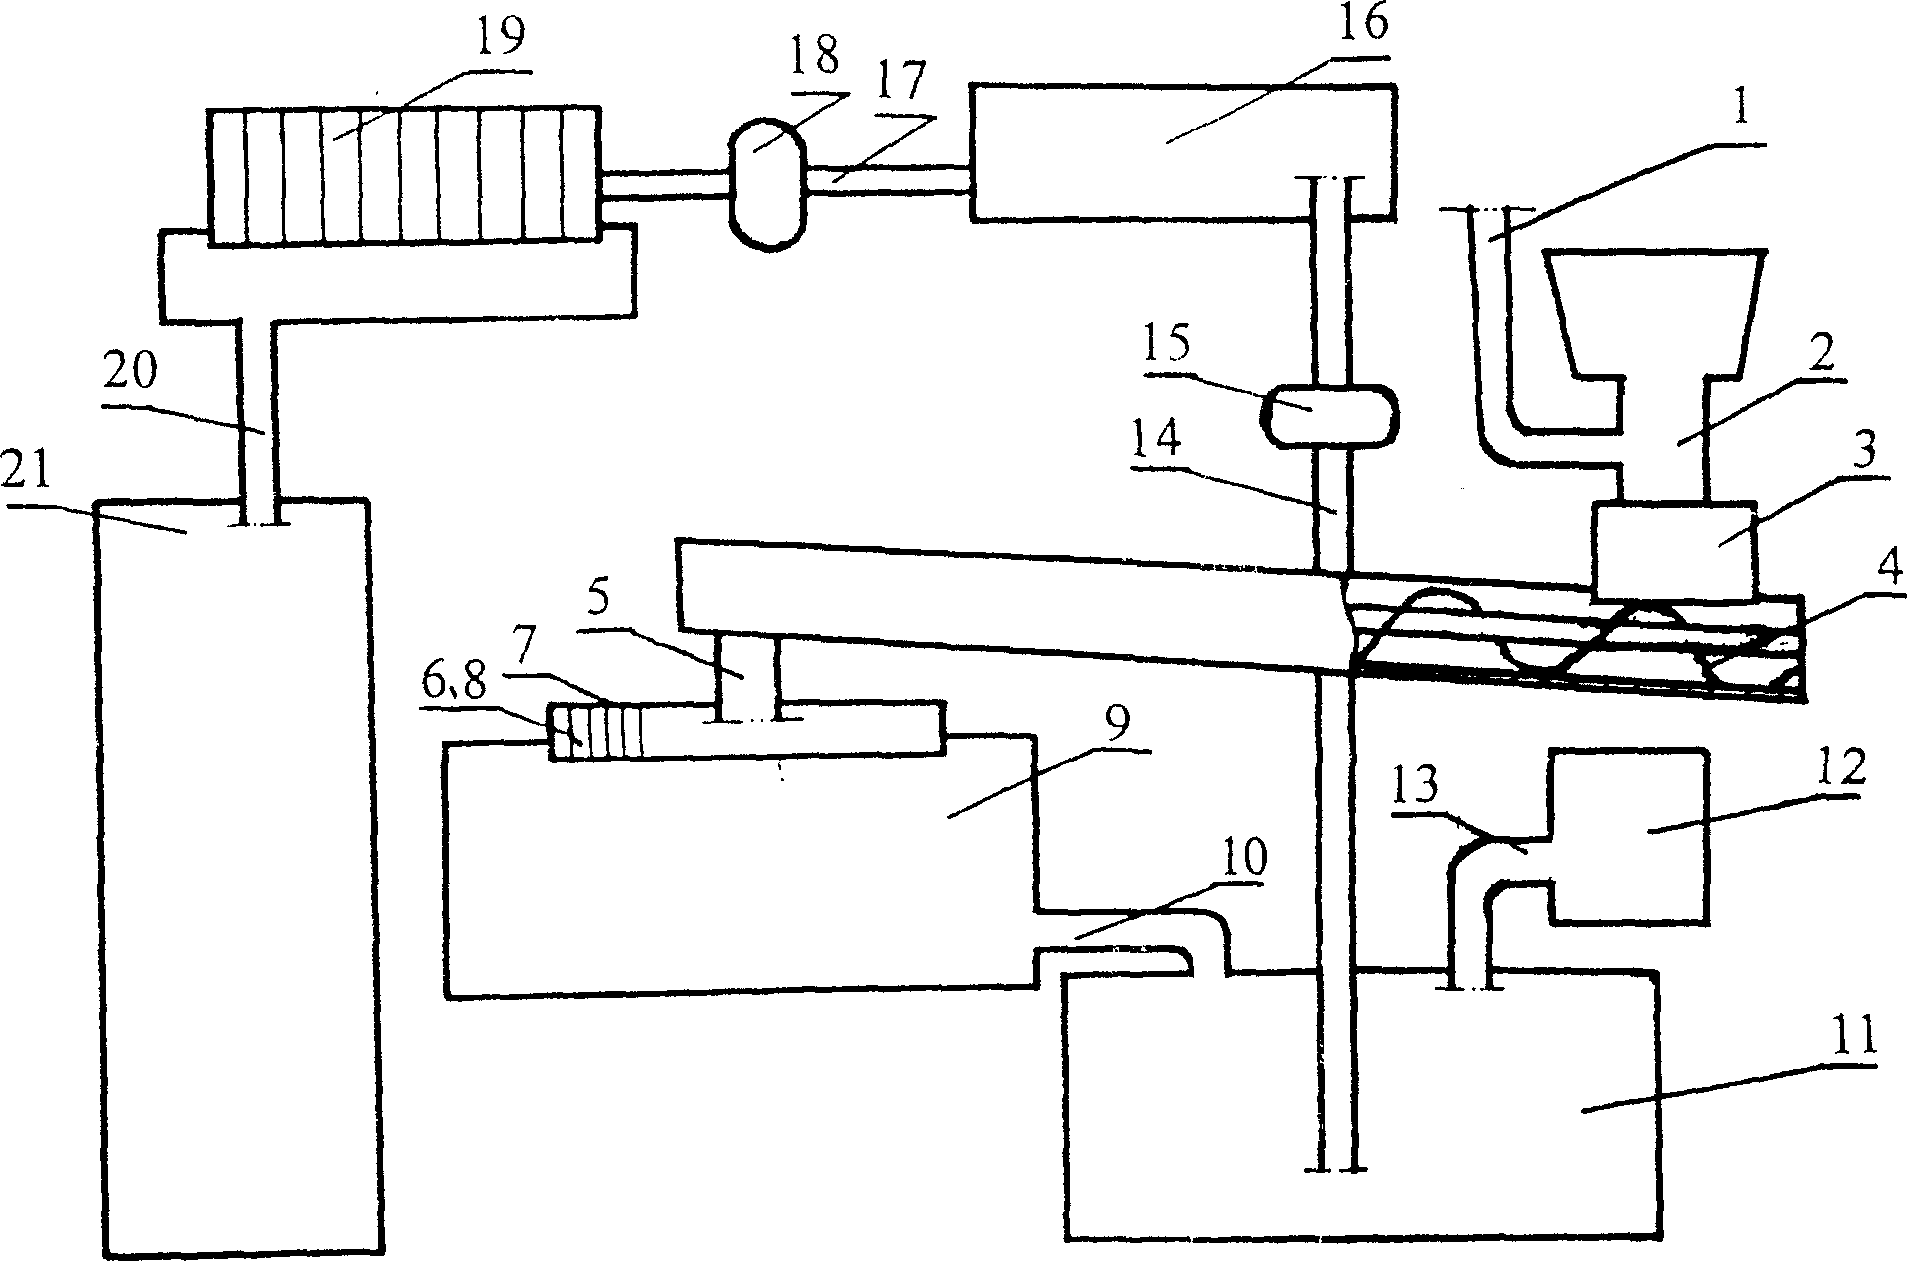 Producing apparatus for pepper oil